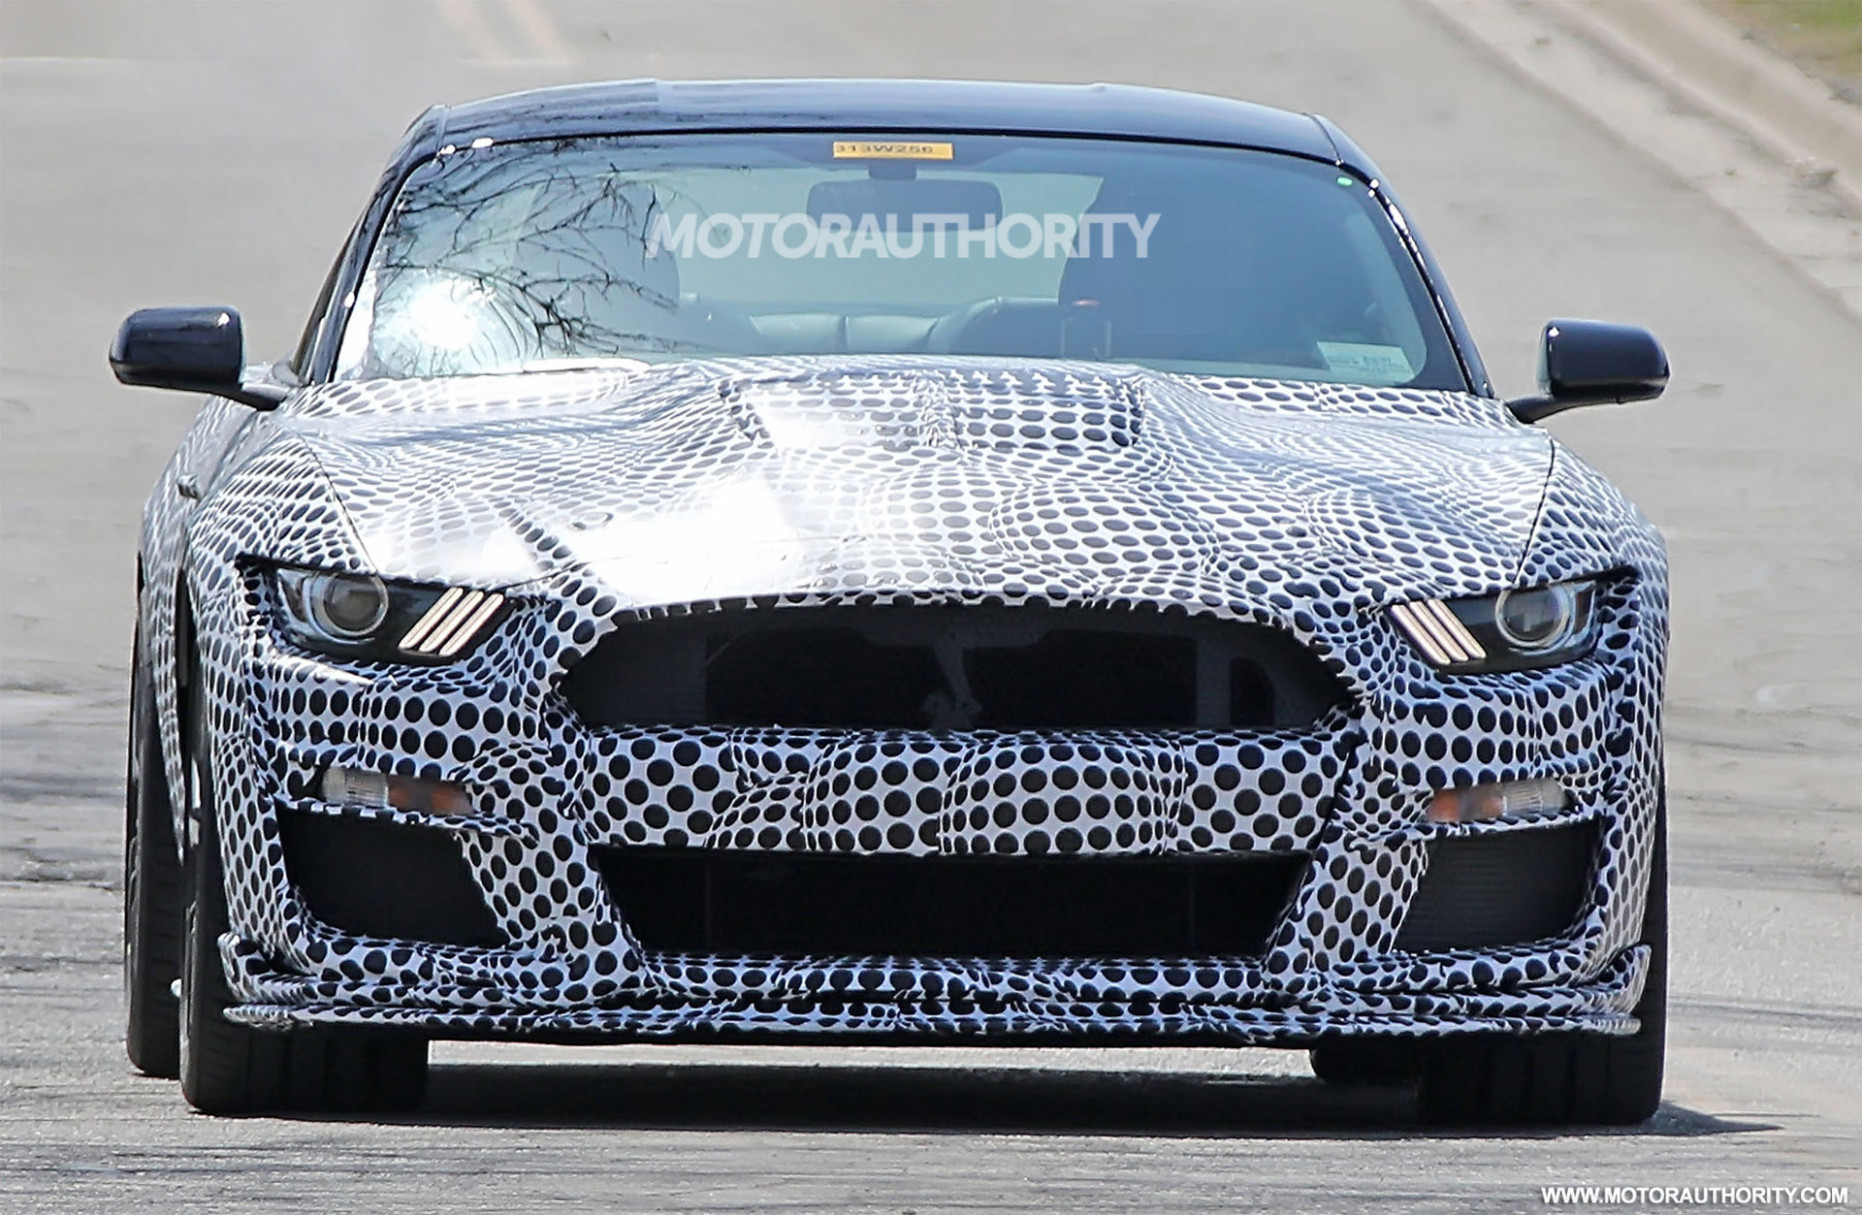 Performance and New Engine 2022 The Spy Shots Ford Mustang Svt Gt 500